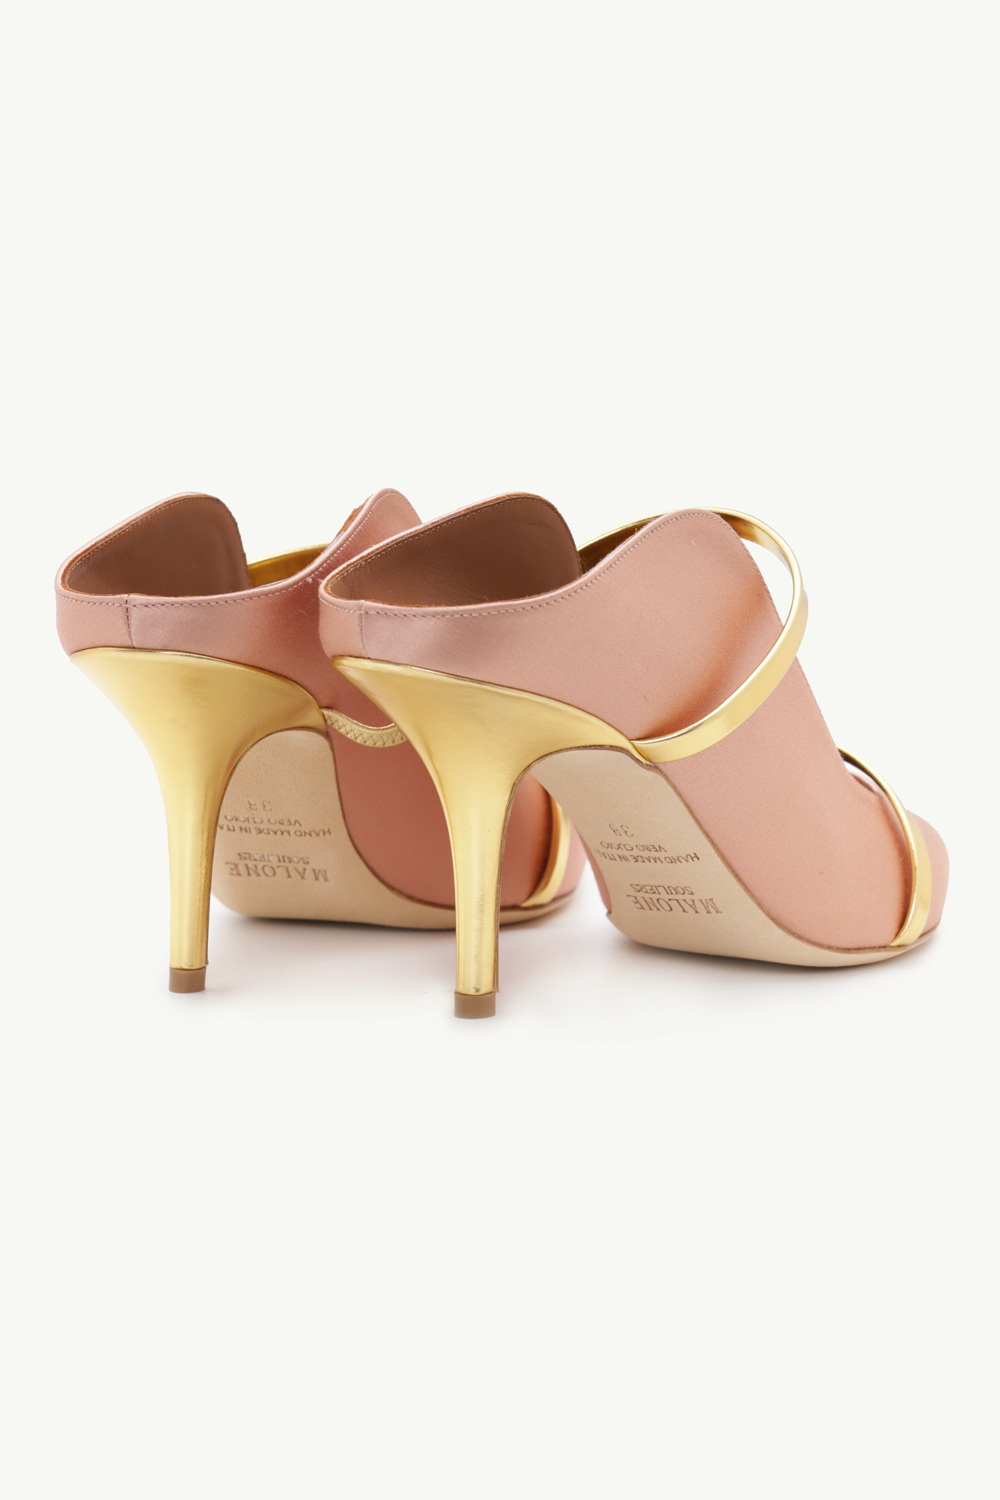 MALONE SOULIERS Maureen Pumps 70mm in Blush Satin/Gold 2